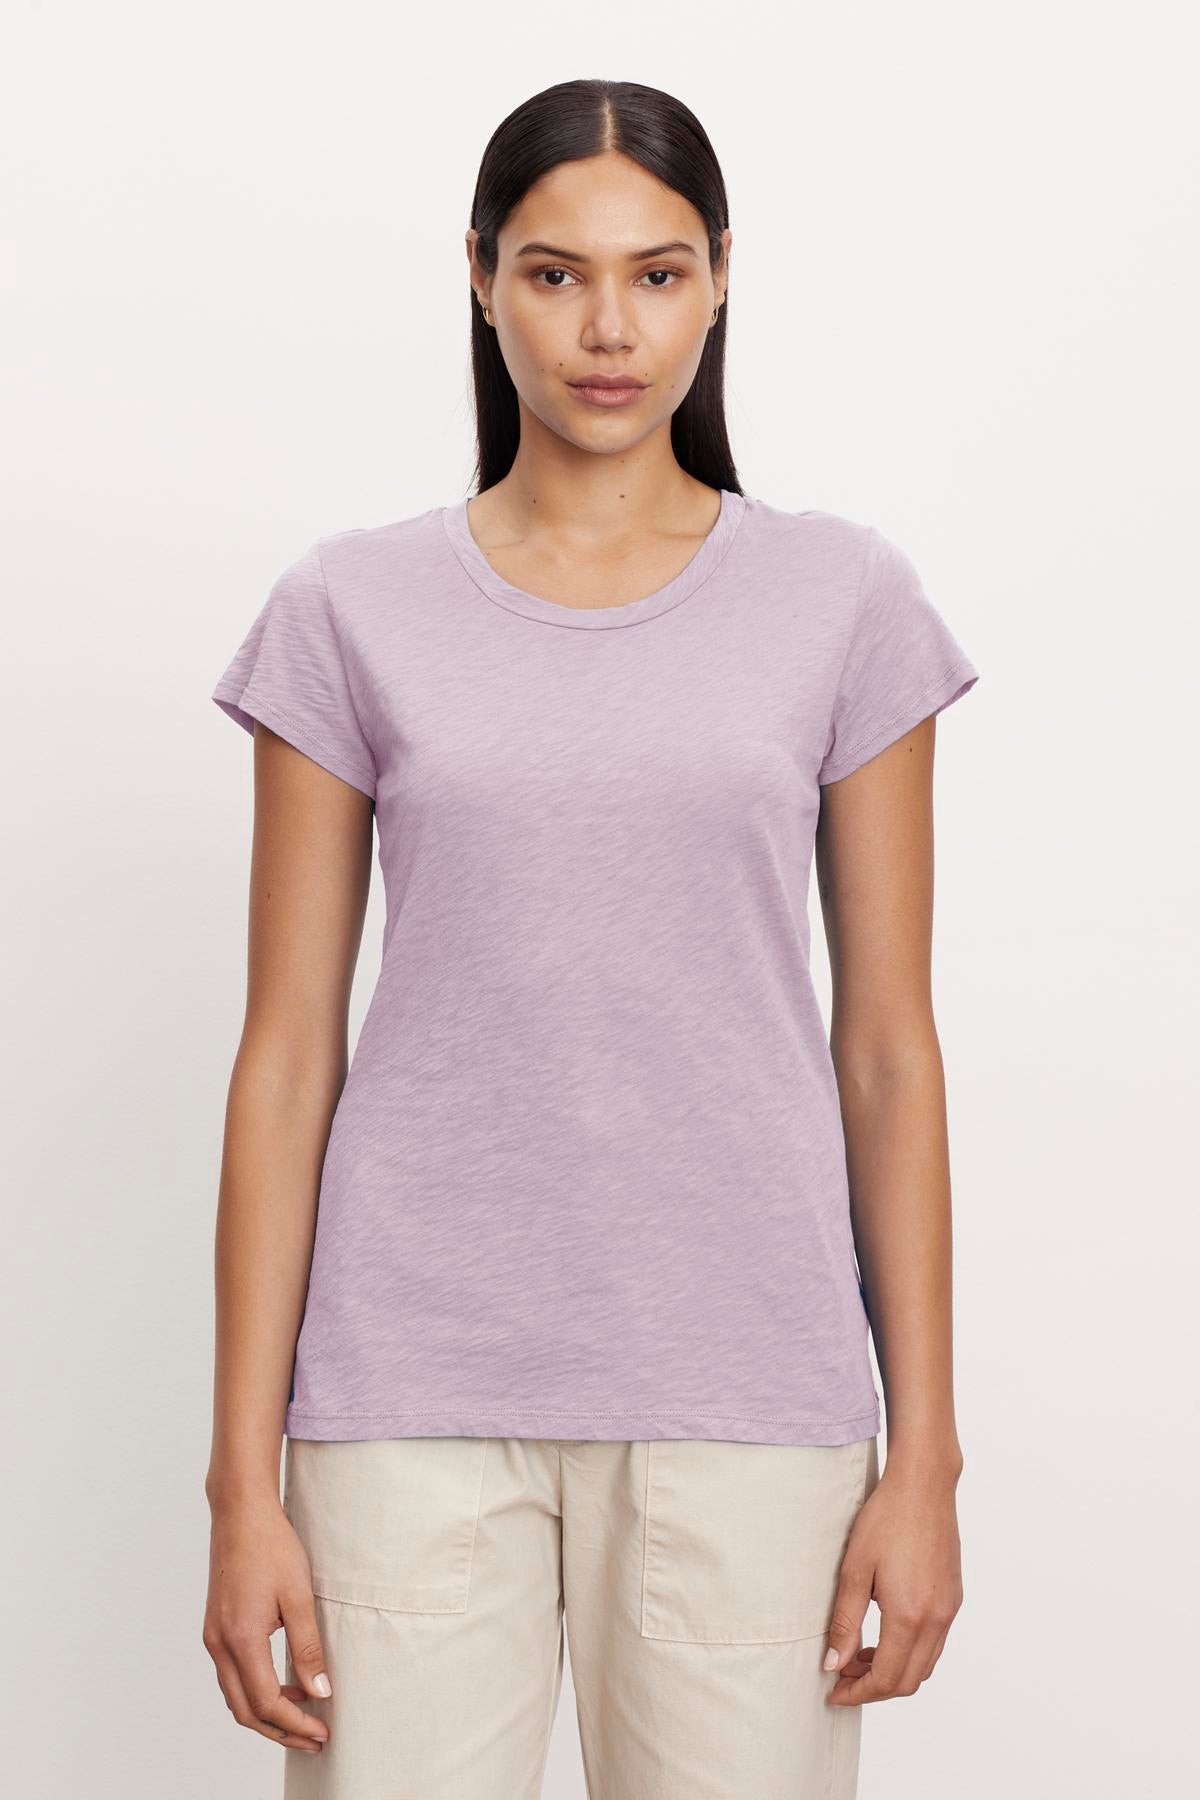 A woman with long, straight hair stands against a plain background wearing a short-sleeve, light purple ODELIA TEE by Velvet by Graham & Spencer with a classic crew neckline and light beige pants. Crafted from premium cotton, this wardrobe essential provides both comfort and style as she faces the camera with a neutral expression.-37249868529857